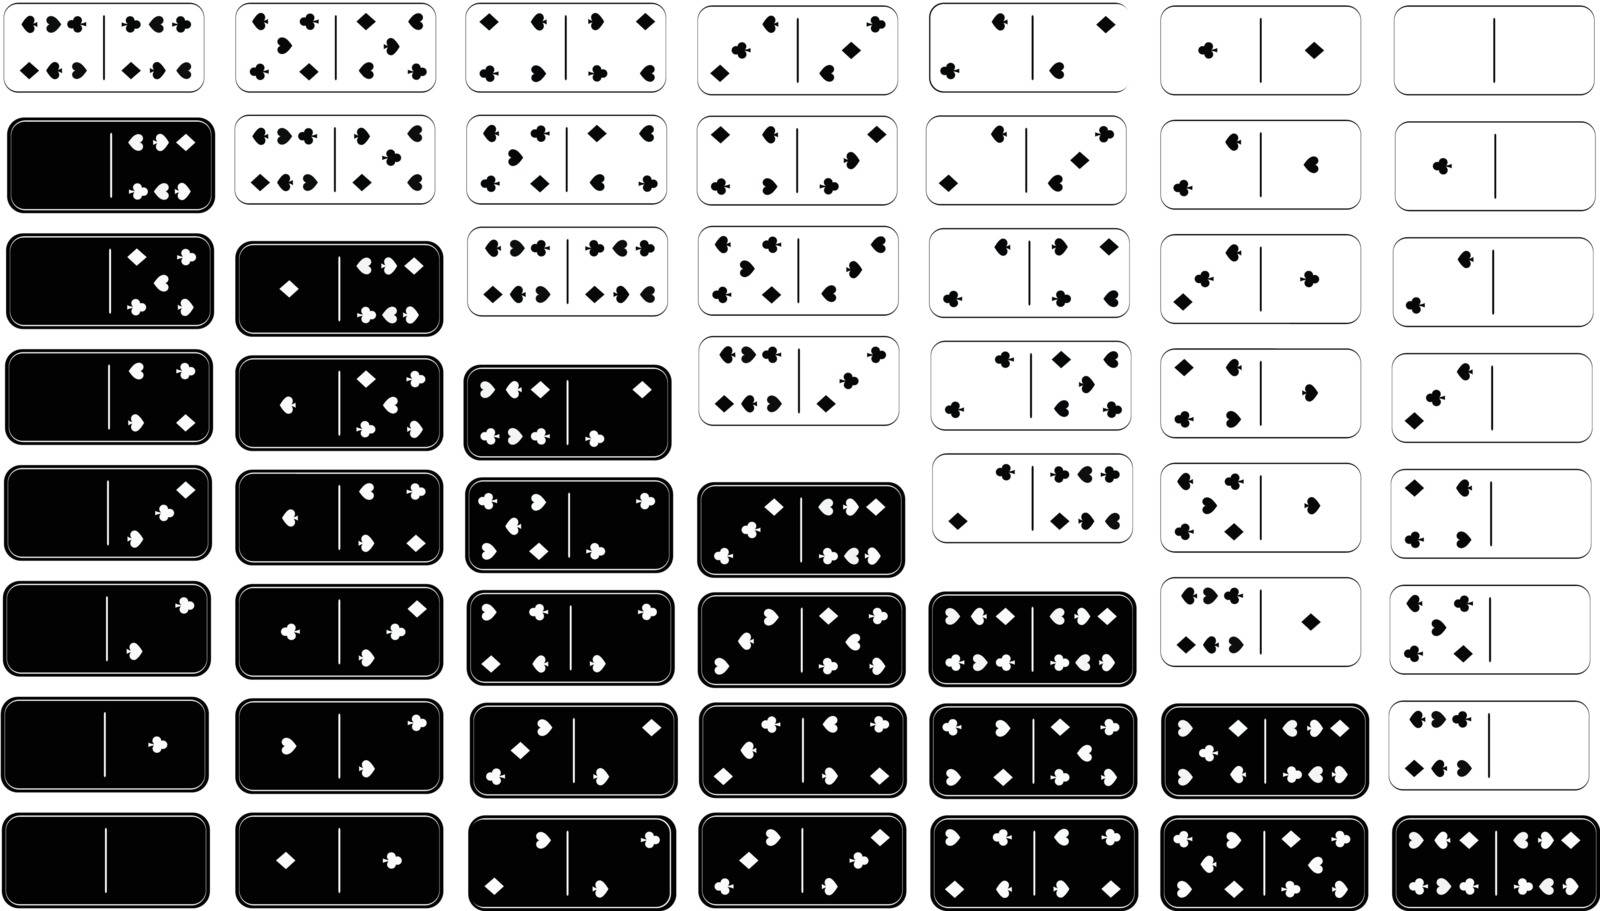 Domino icon illustration of twenty-eight pieces of the contrast. FOR USE design, decoration, printing, smart phone, website, etc.